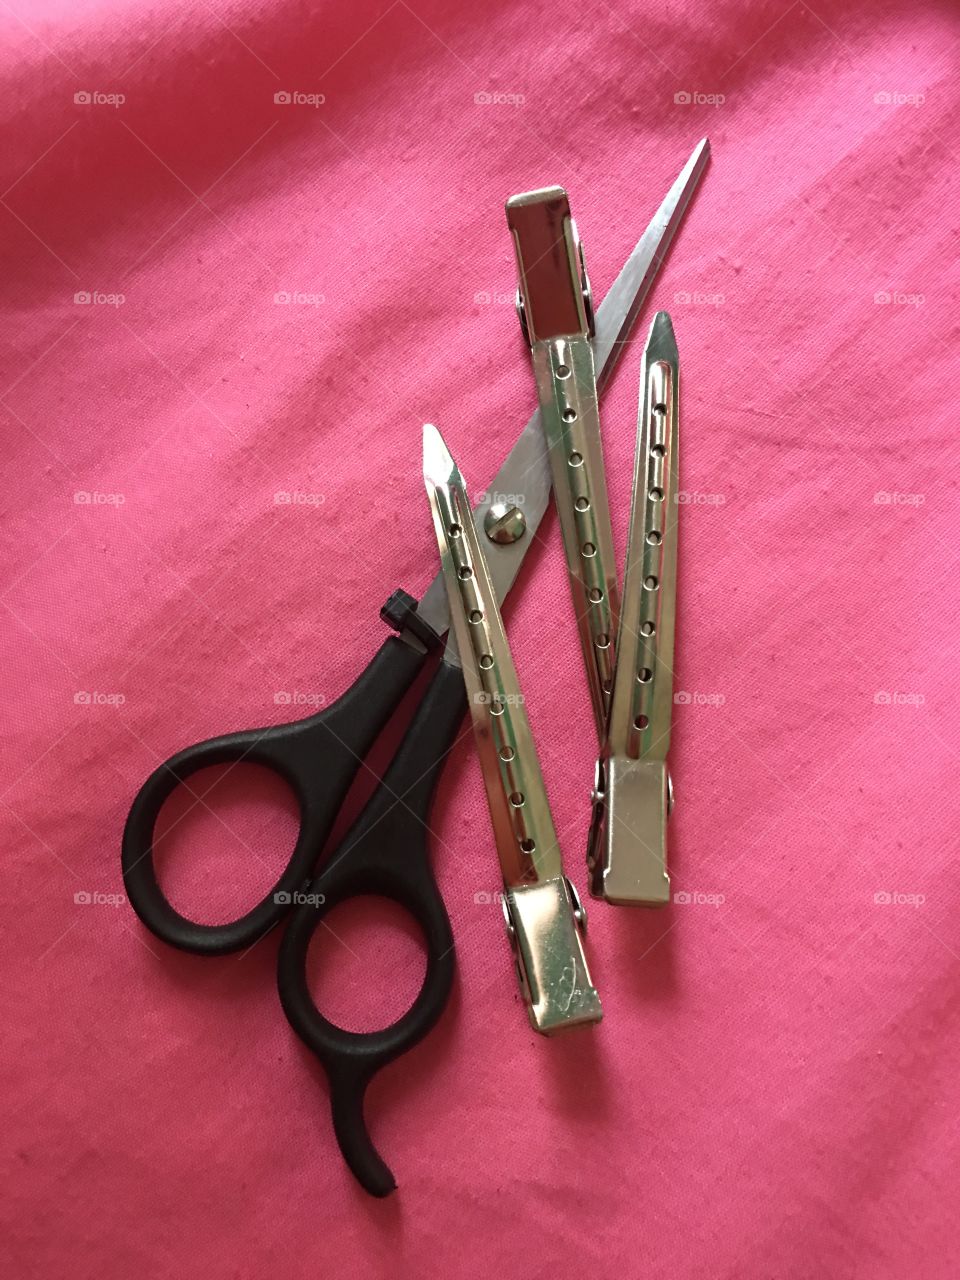 High angle view of scissors with hair clips